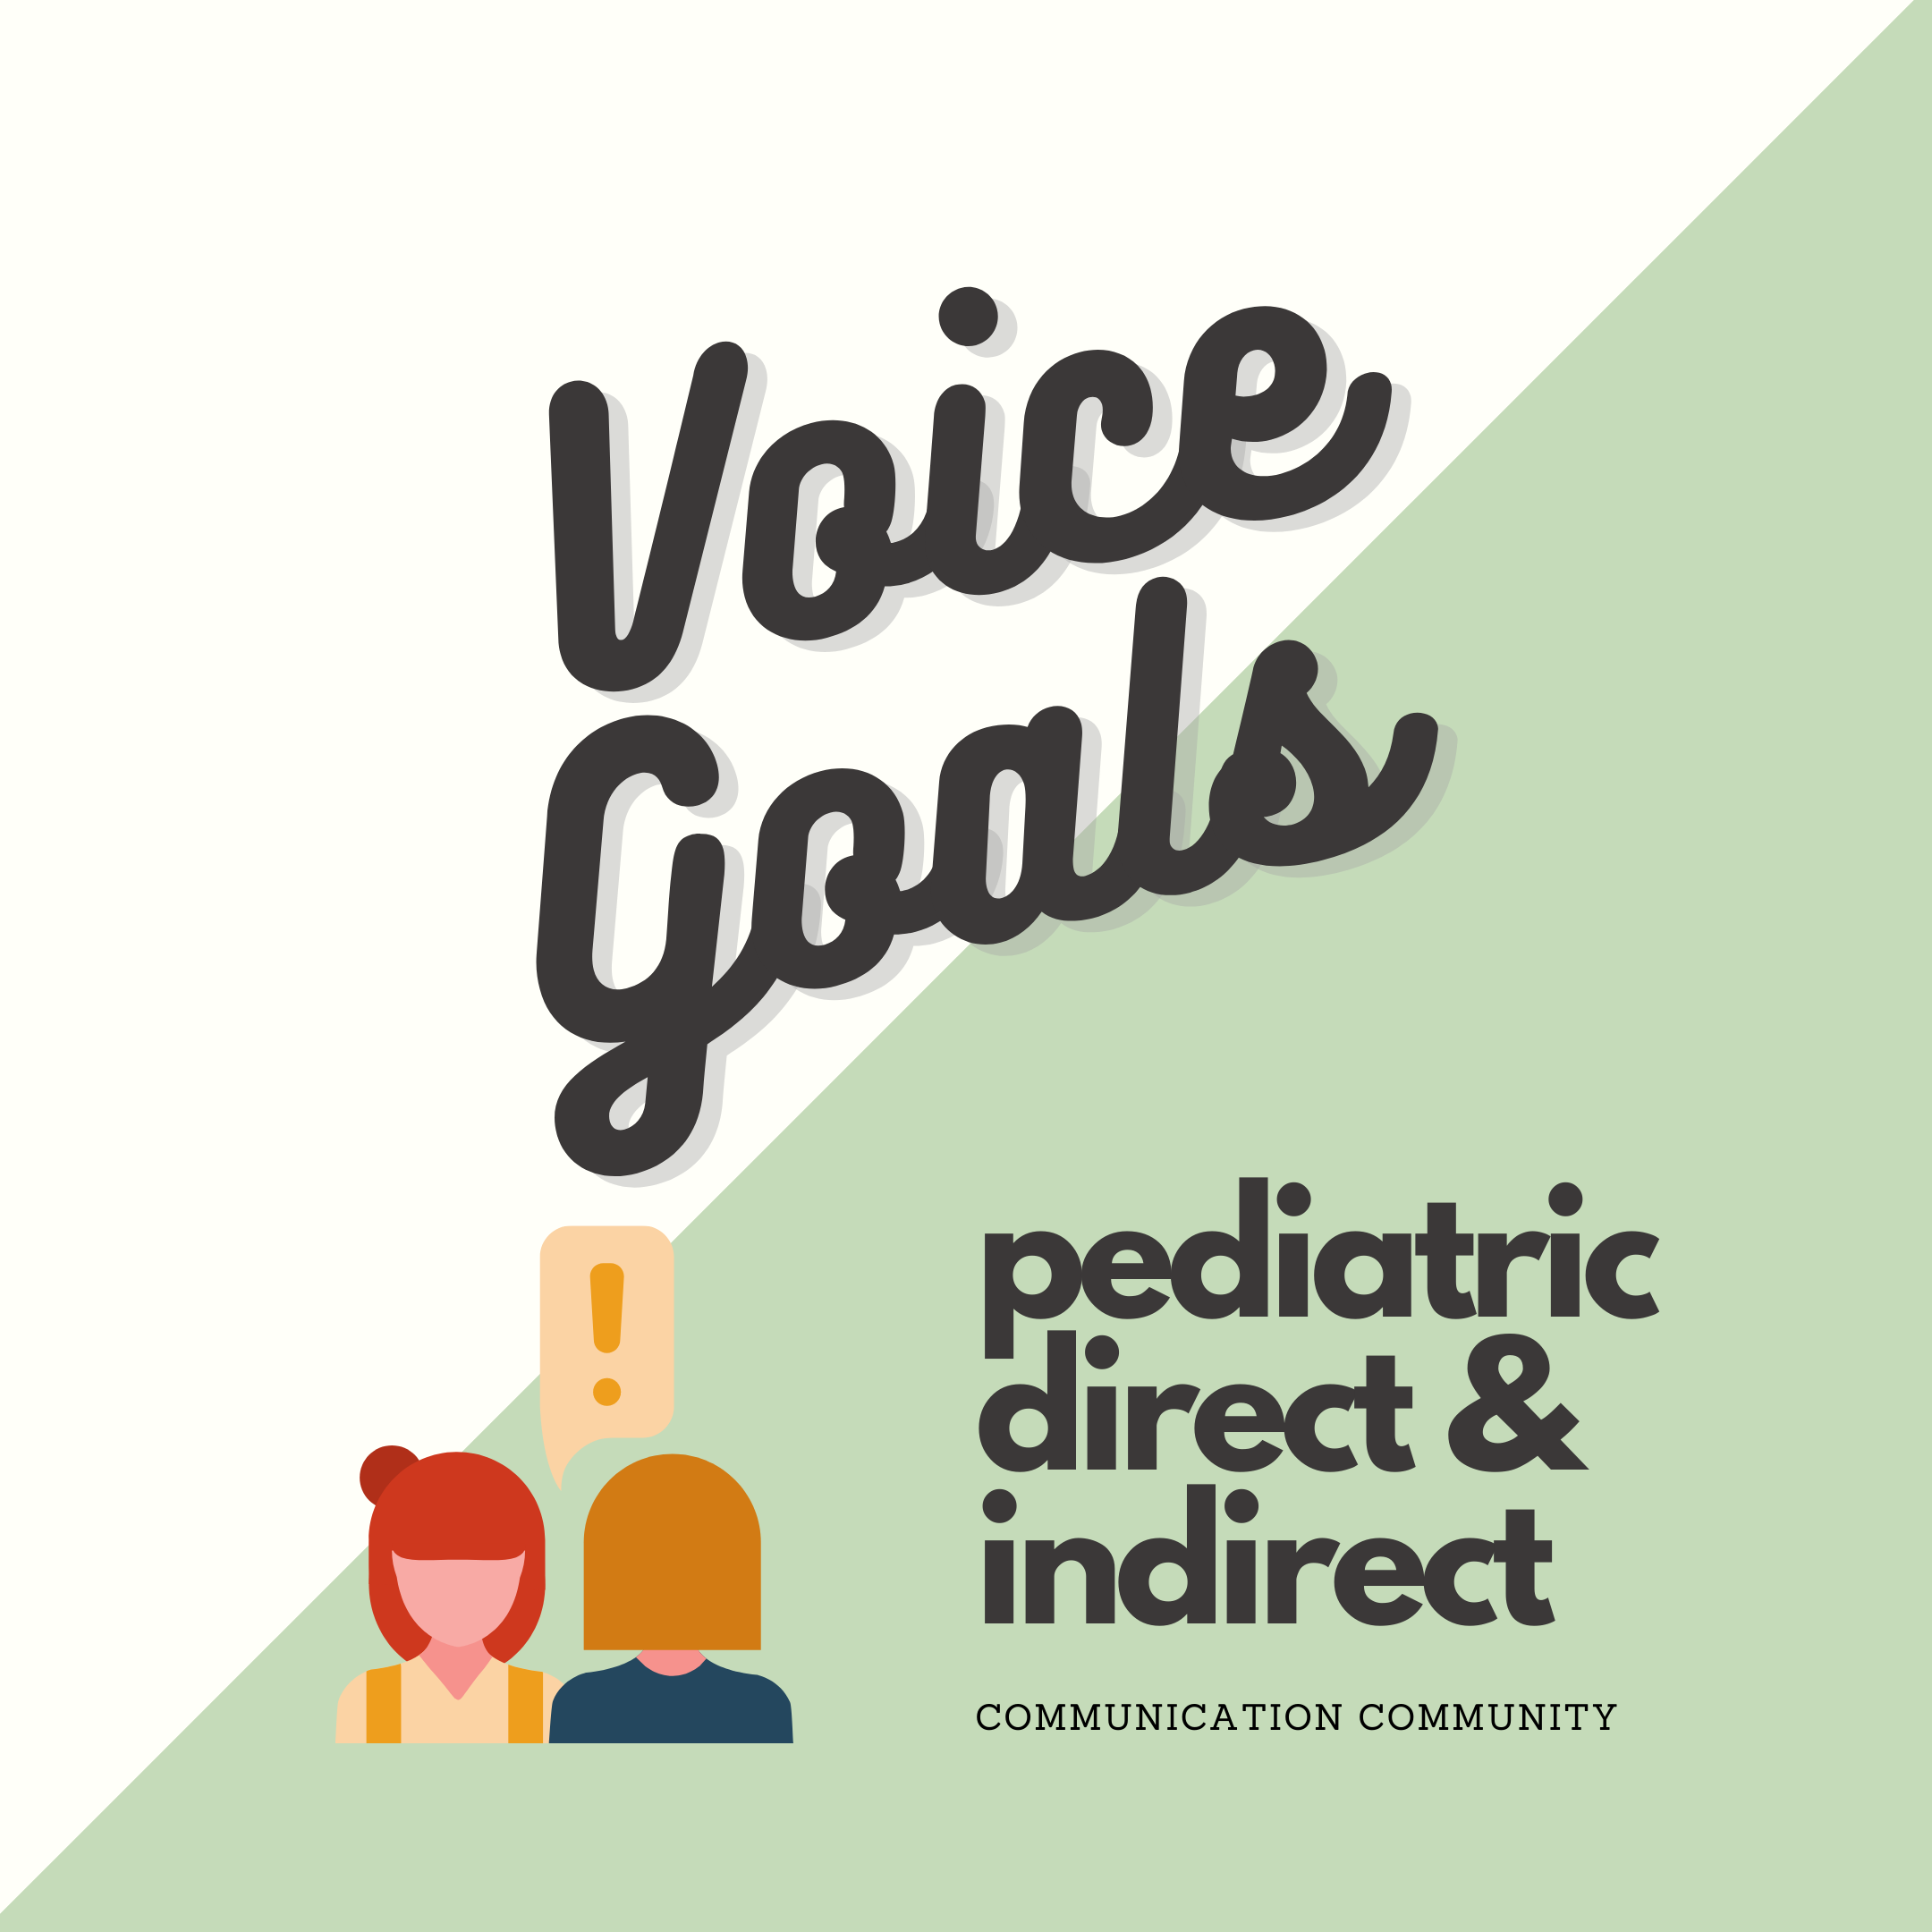 How to Write Voice Goals (Pediatric) - Goal Bank Included